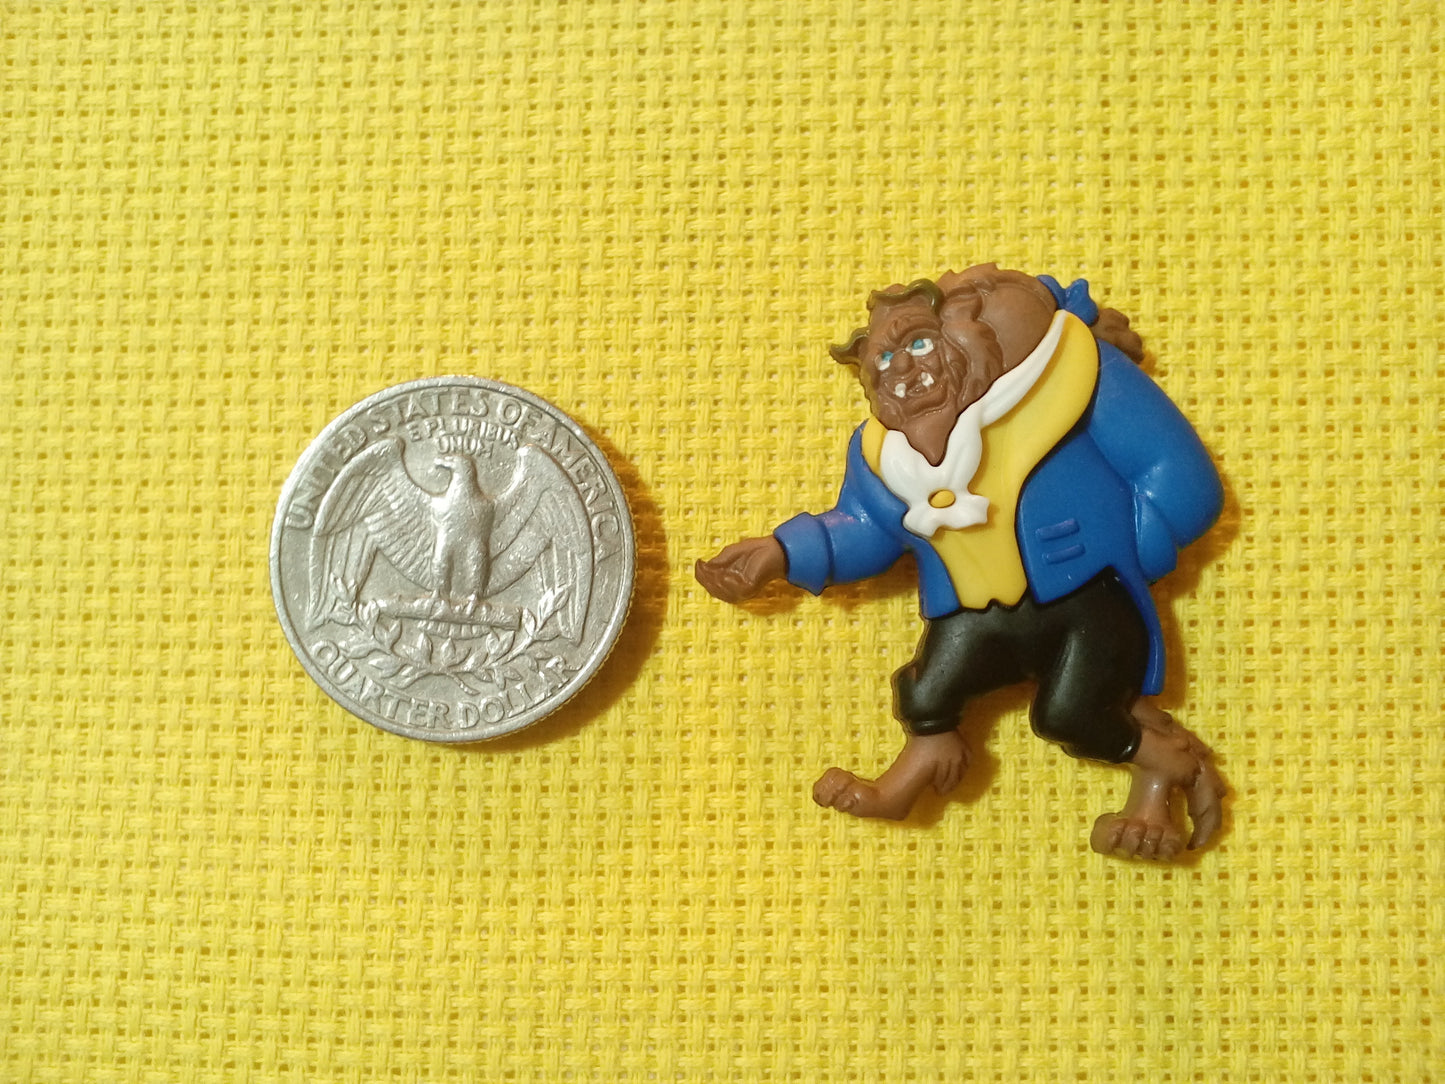 Beauty and the Beast Needle Minders